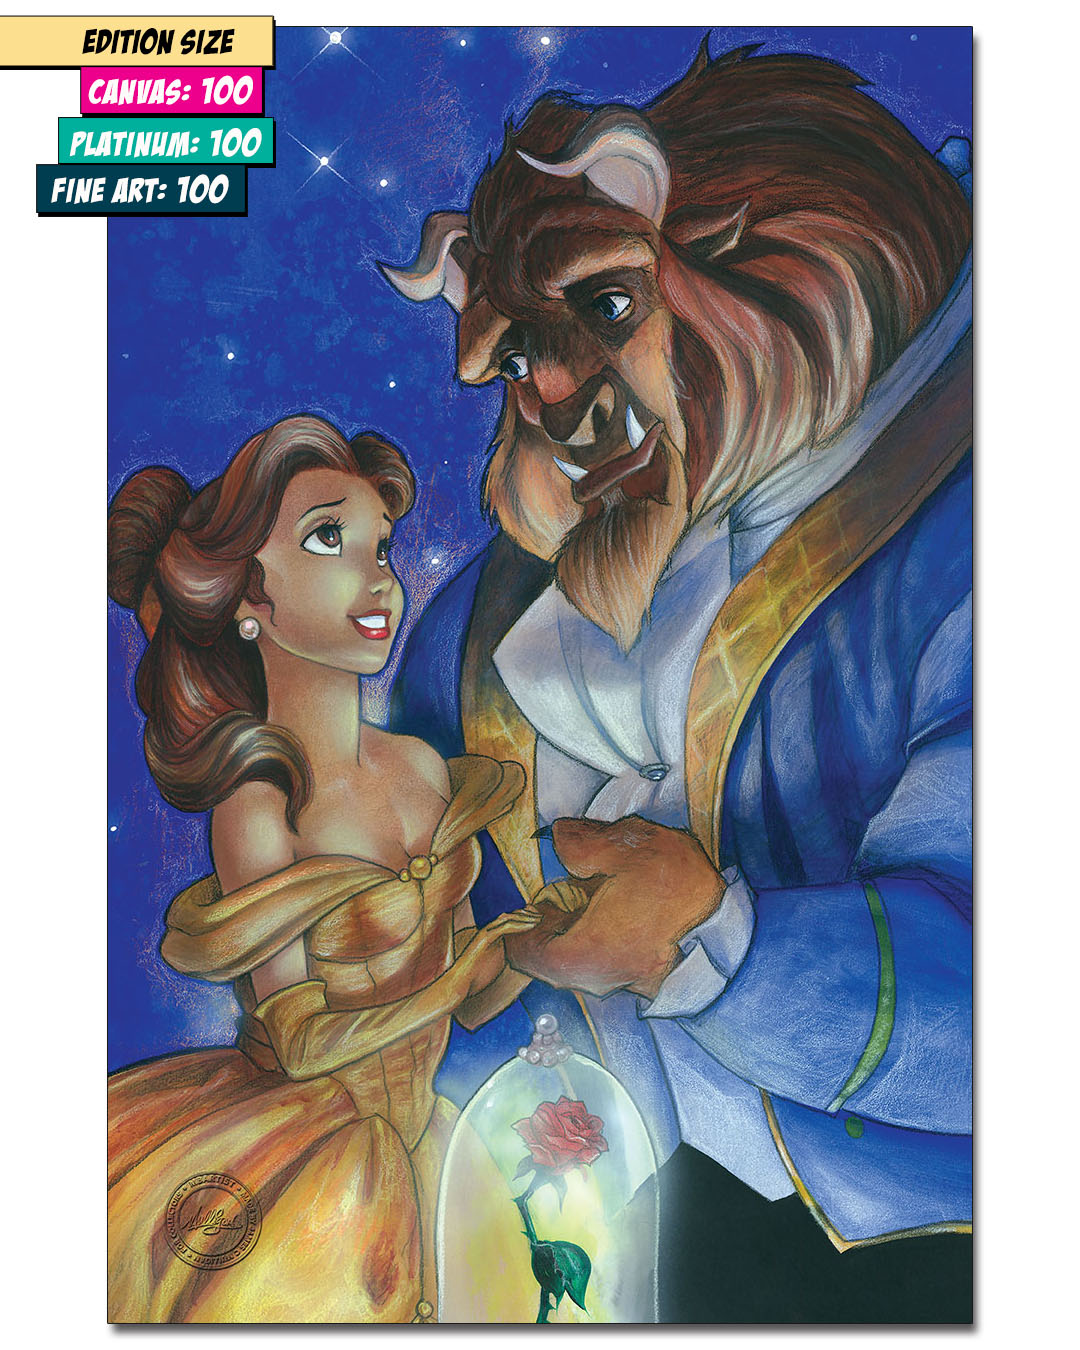 BEAUTY AND THE BEAST: TALE AS OLD AS TIME